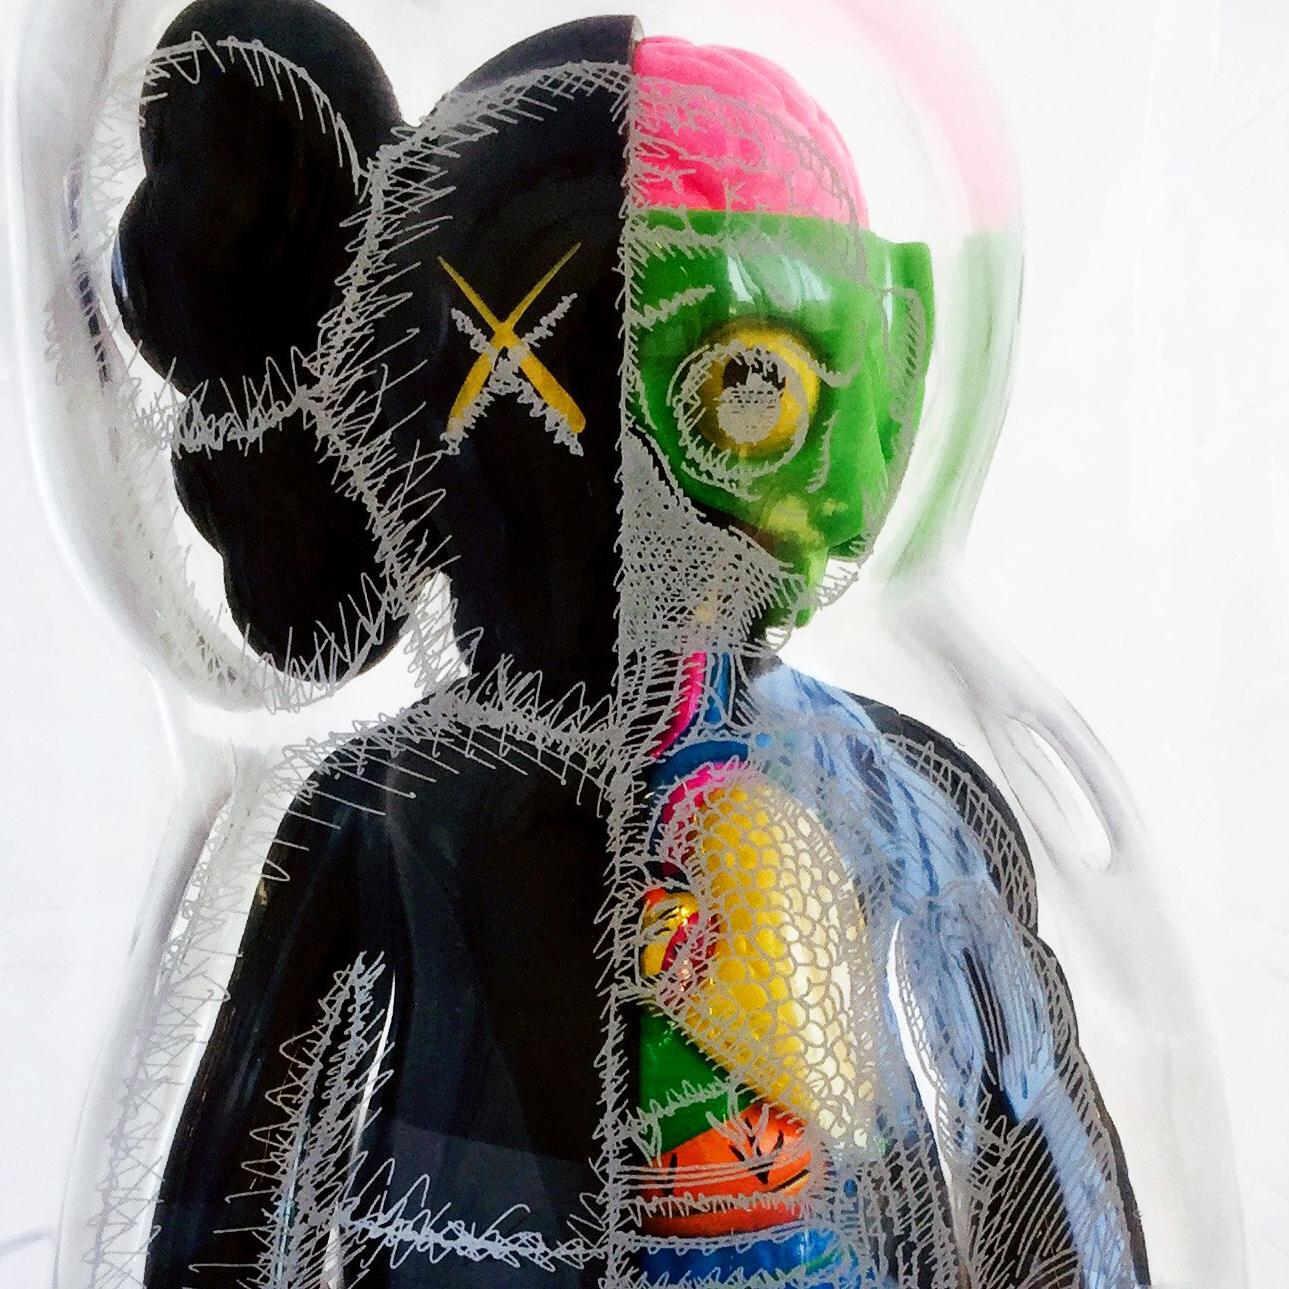 KAWS Companion, Black Flayed 2016. New and sealed in its original packaging. Published by Medicom Japan in conjunction with the exhibition, KAWS: Where The End Starts at the Modern Art Museum of Fort Worth. ThIs figurine has since sold out.